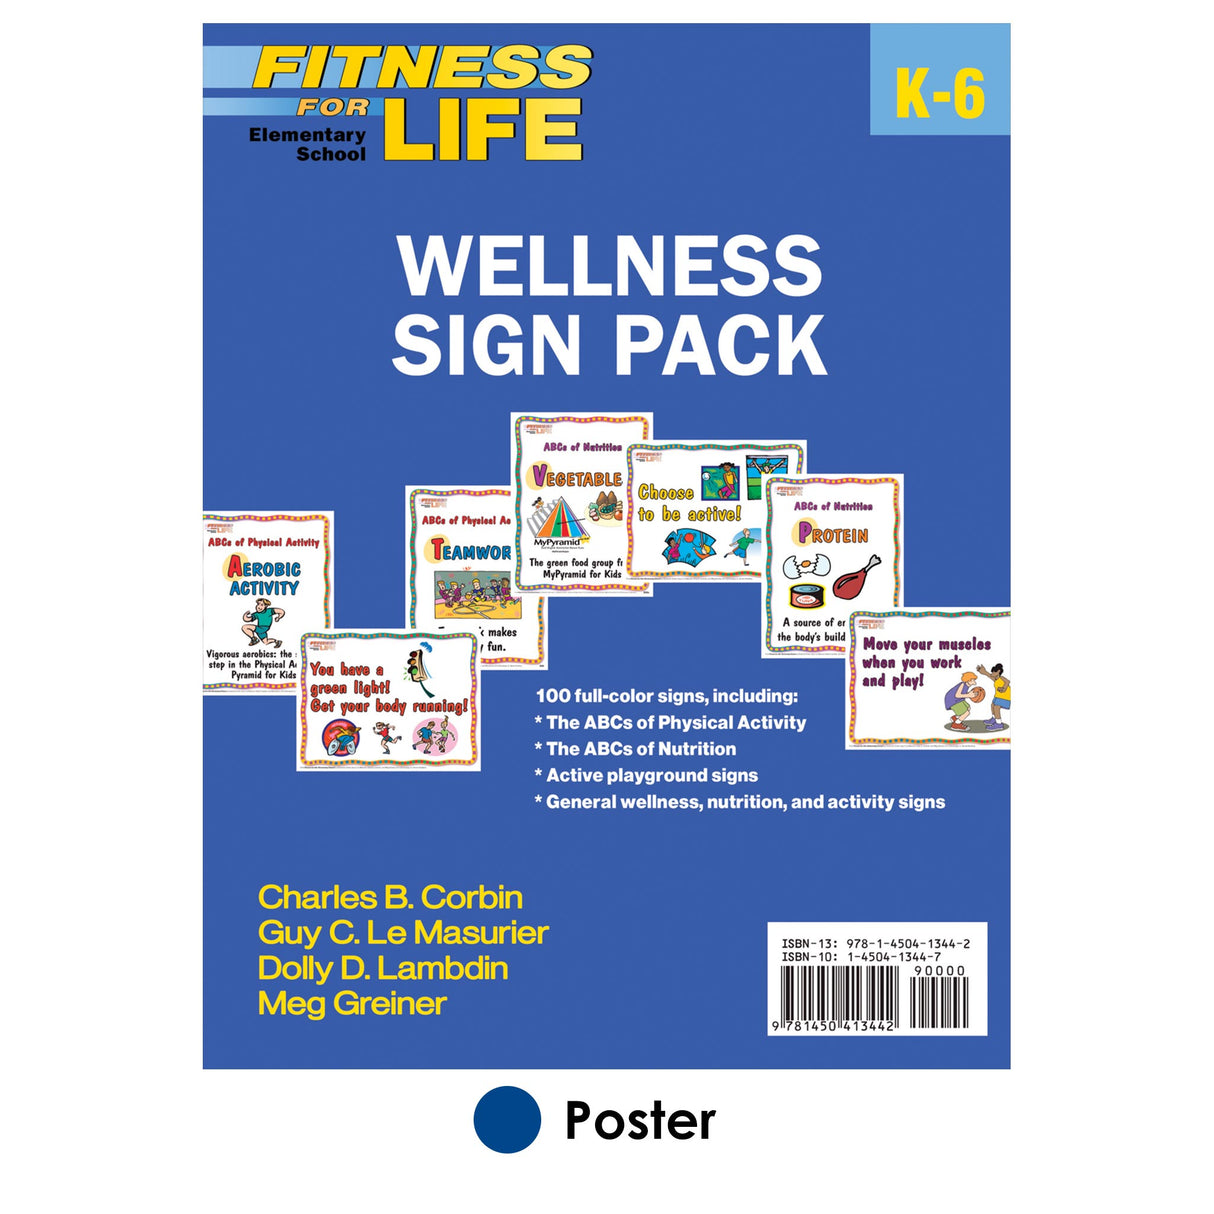 Fitness for Life: Elementary School Wellness Sign Pack